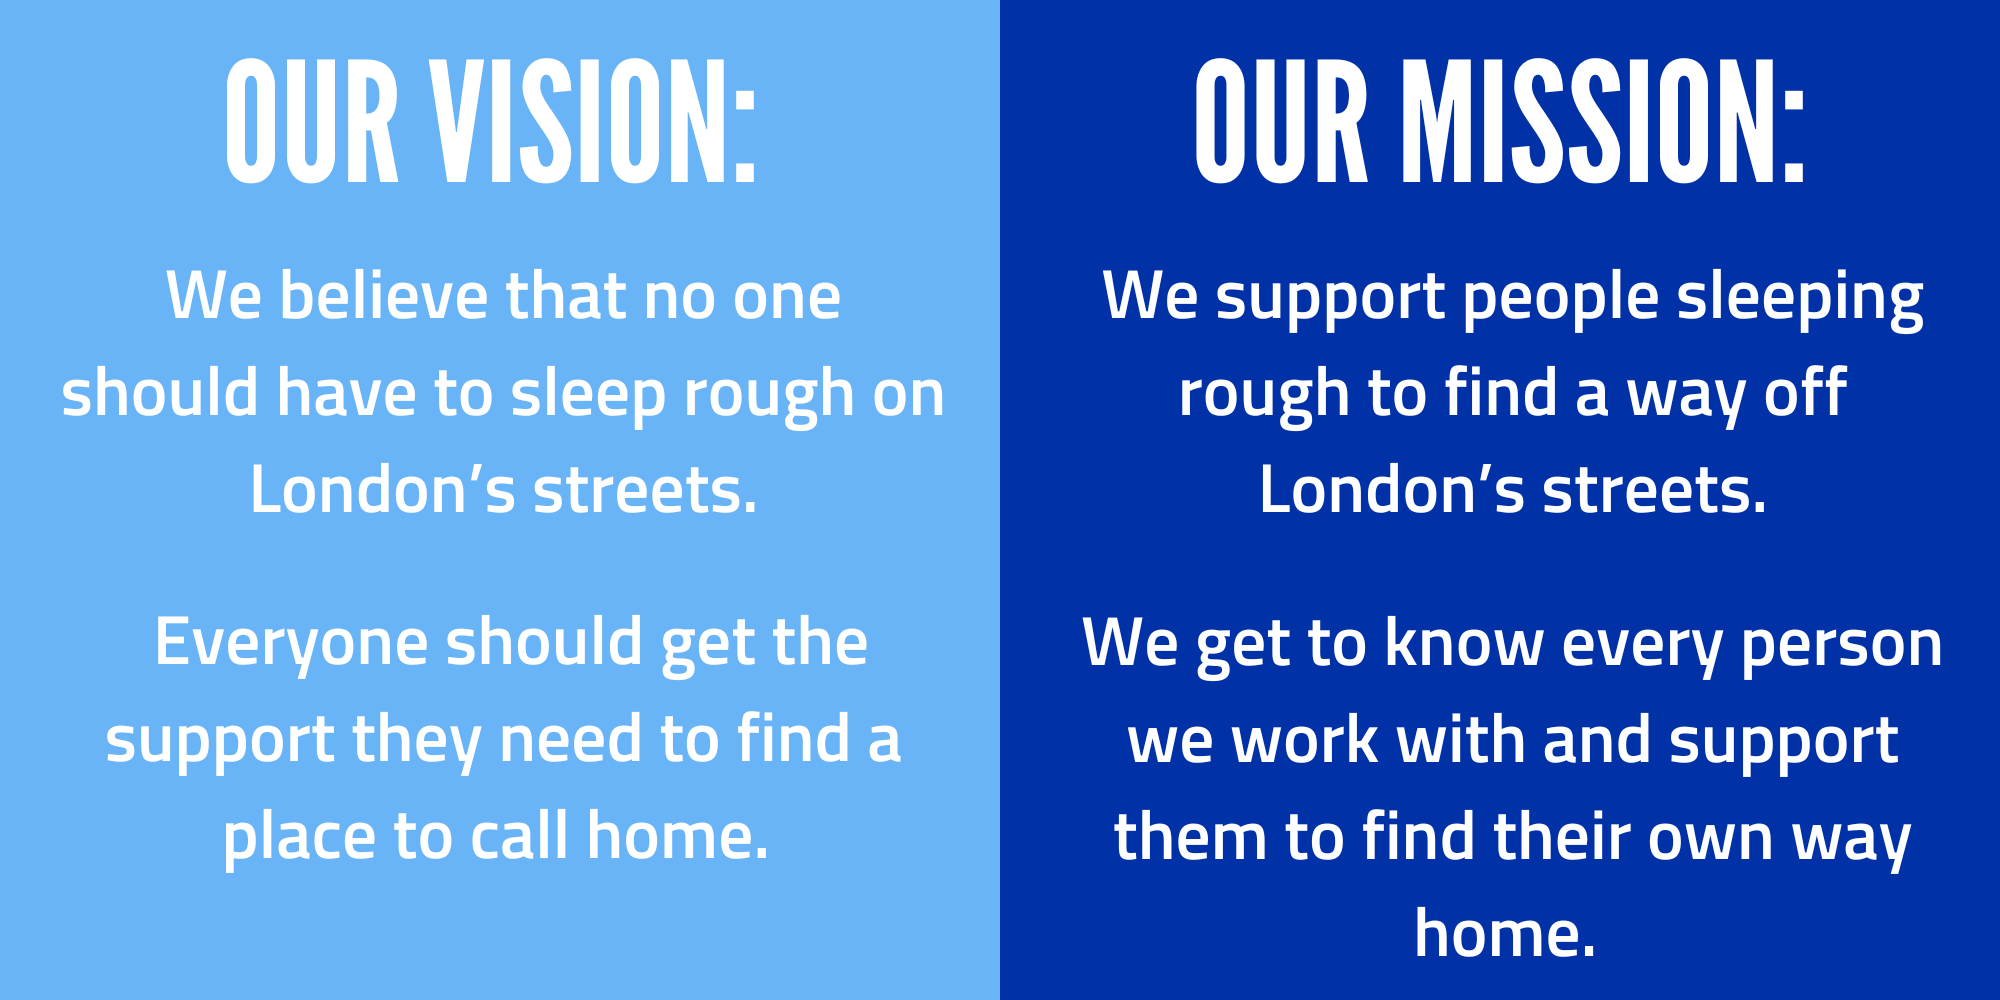 who we are - the connection Our vision: 
We believe that no one should have to sleep rough on London’s streets, and that everyone should get the support they need to find a place to call home. 

Our mission: 
We support people sleeping rough to find a way off London’s streets. 
We get to know every person we work with, understanding what they need to recover, helping them build on their strengths, and supporting them to find their own way home. 
